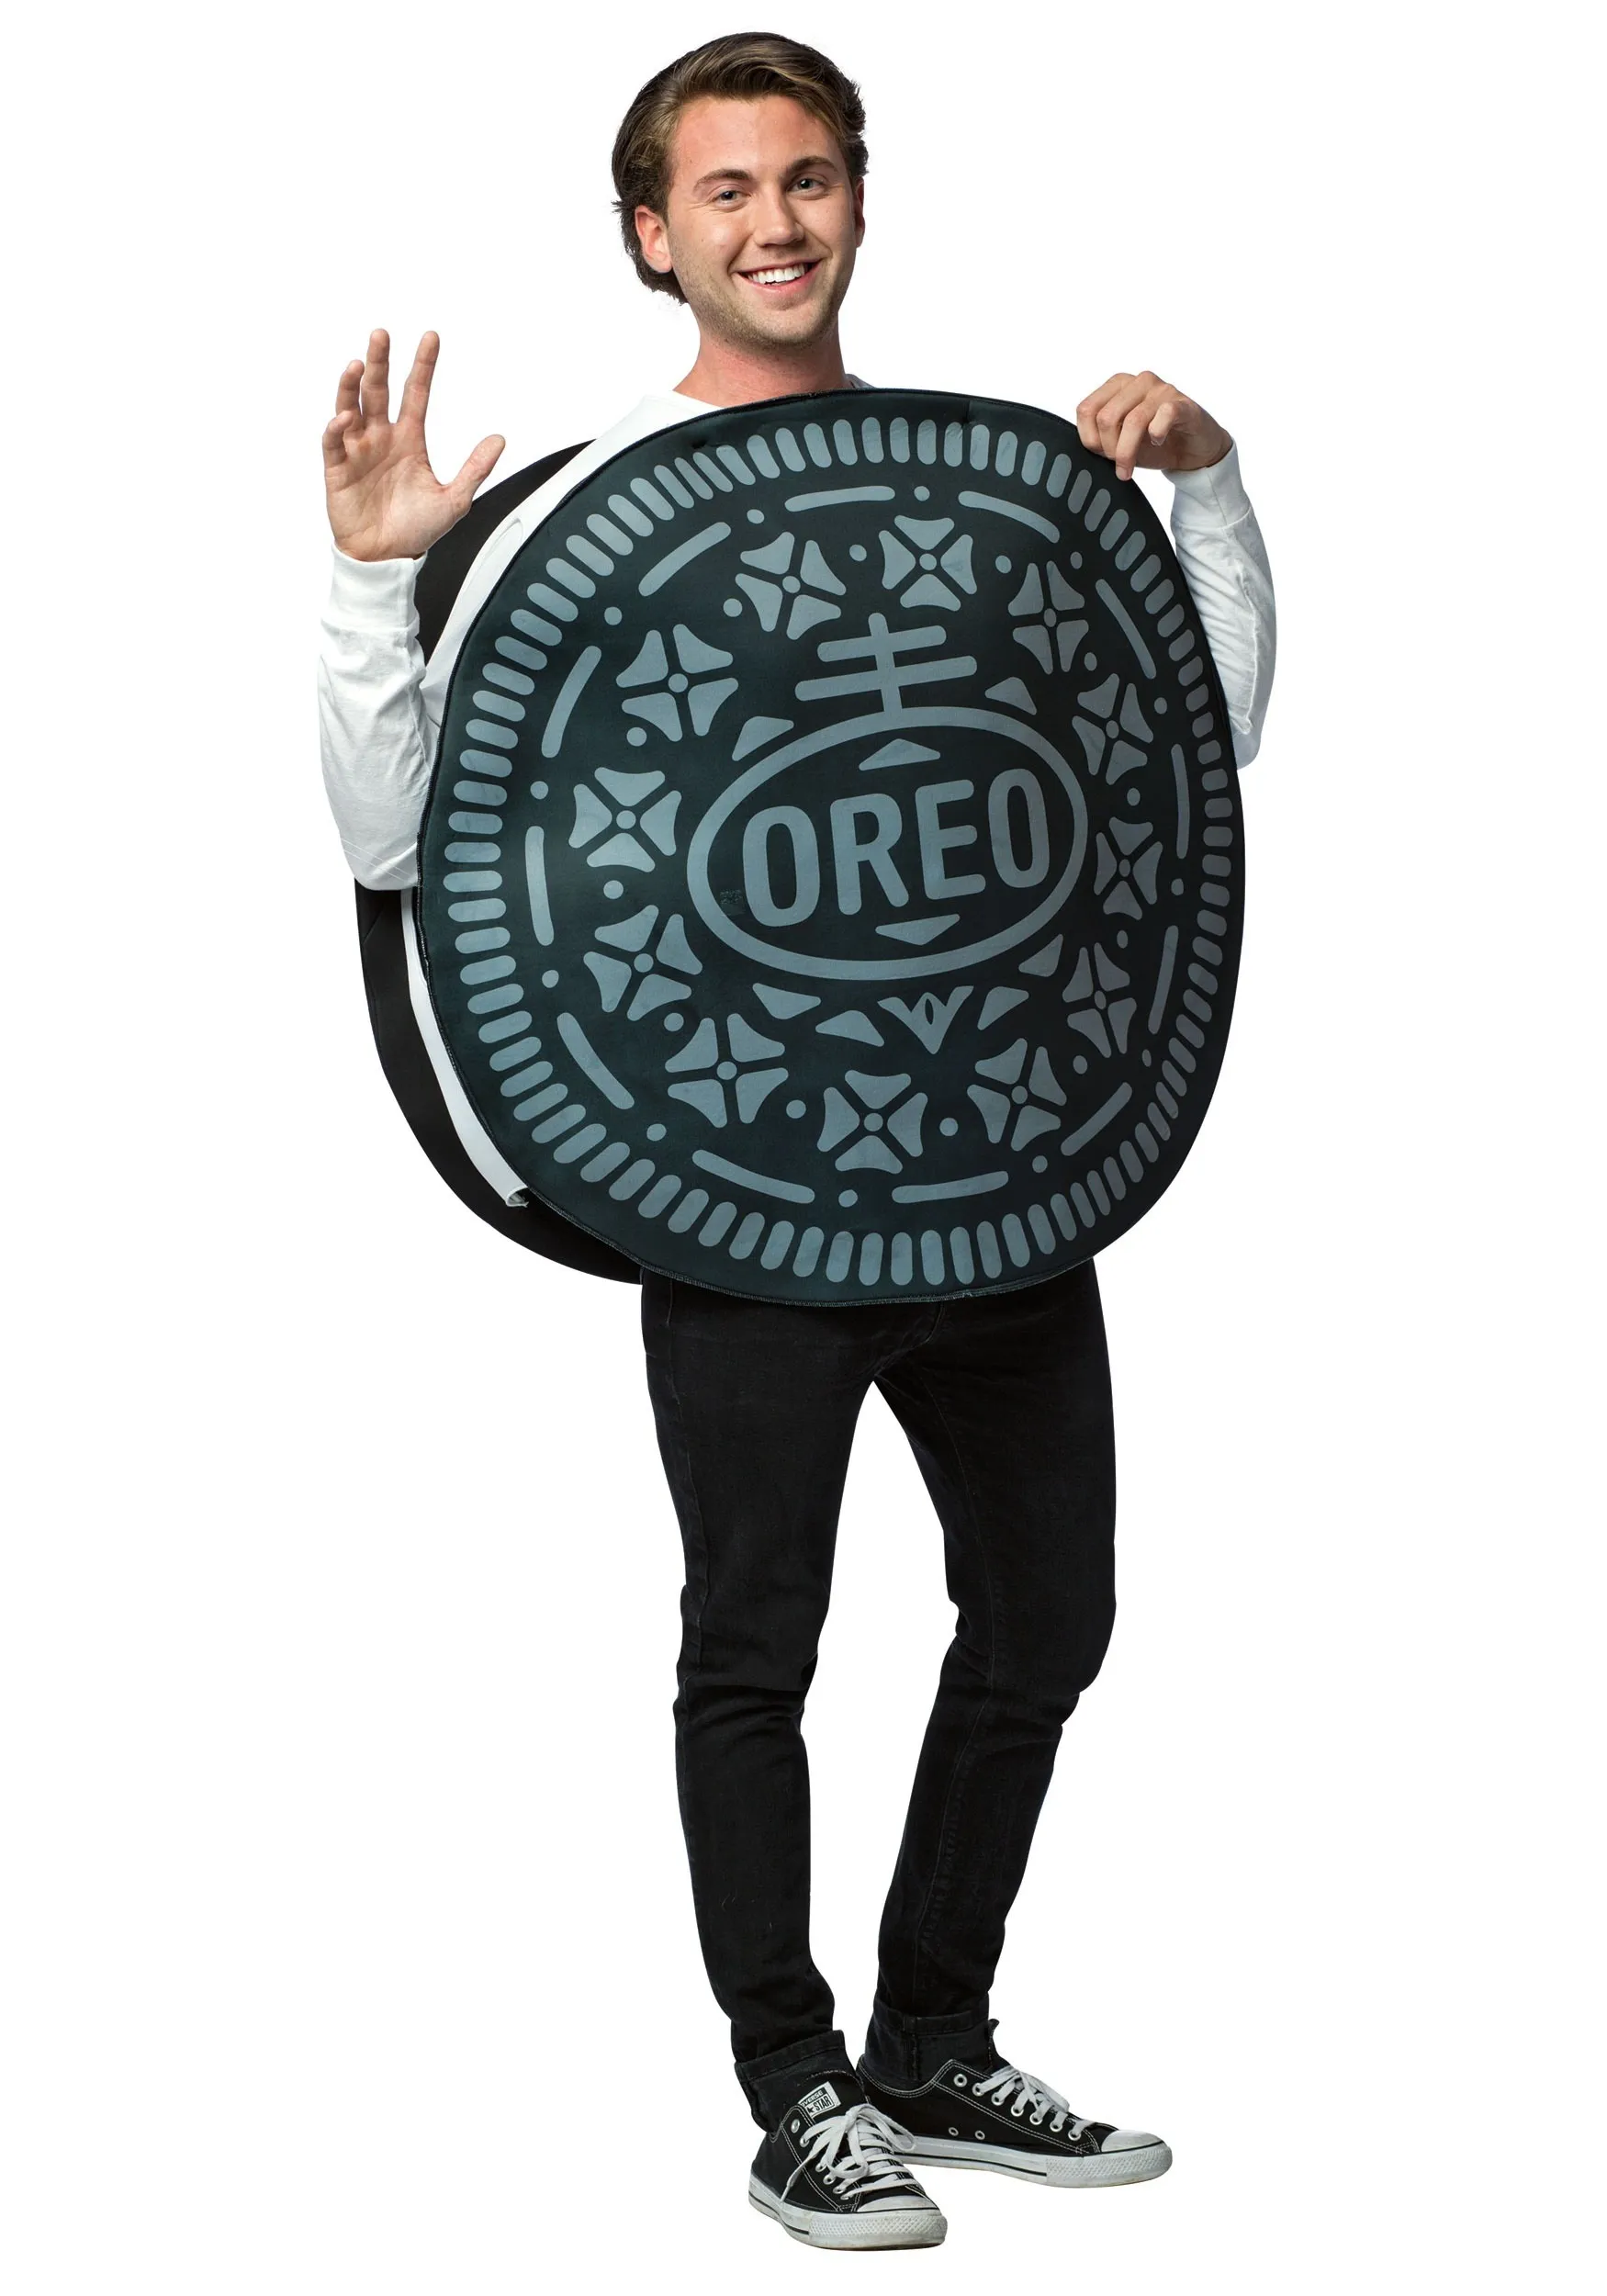 10+ Creative Cookie Costume Ideas For Adults